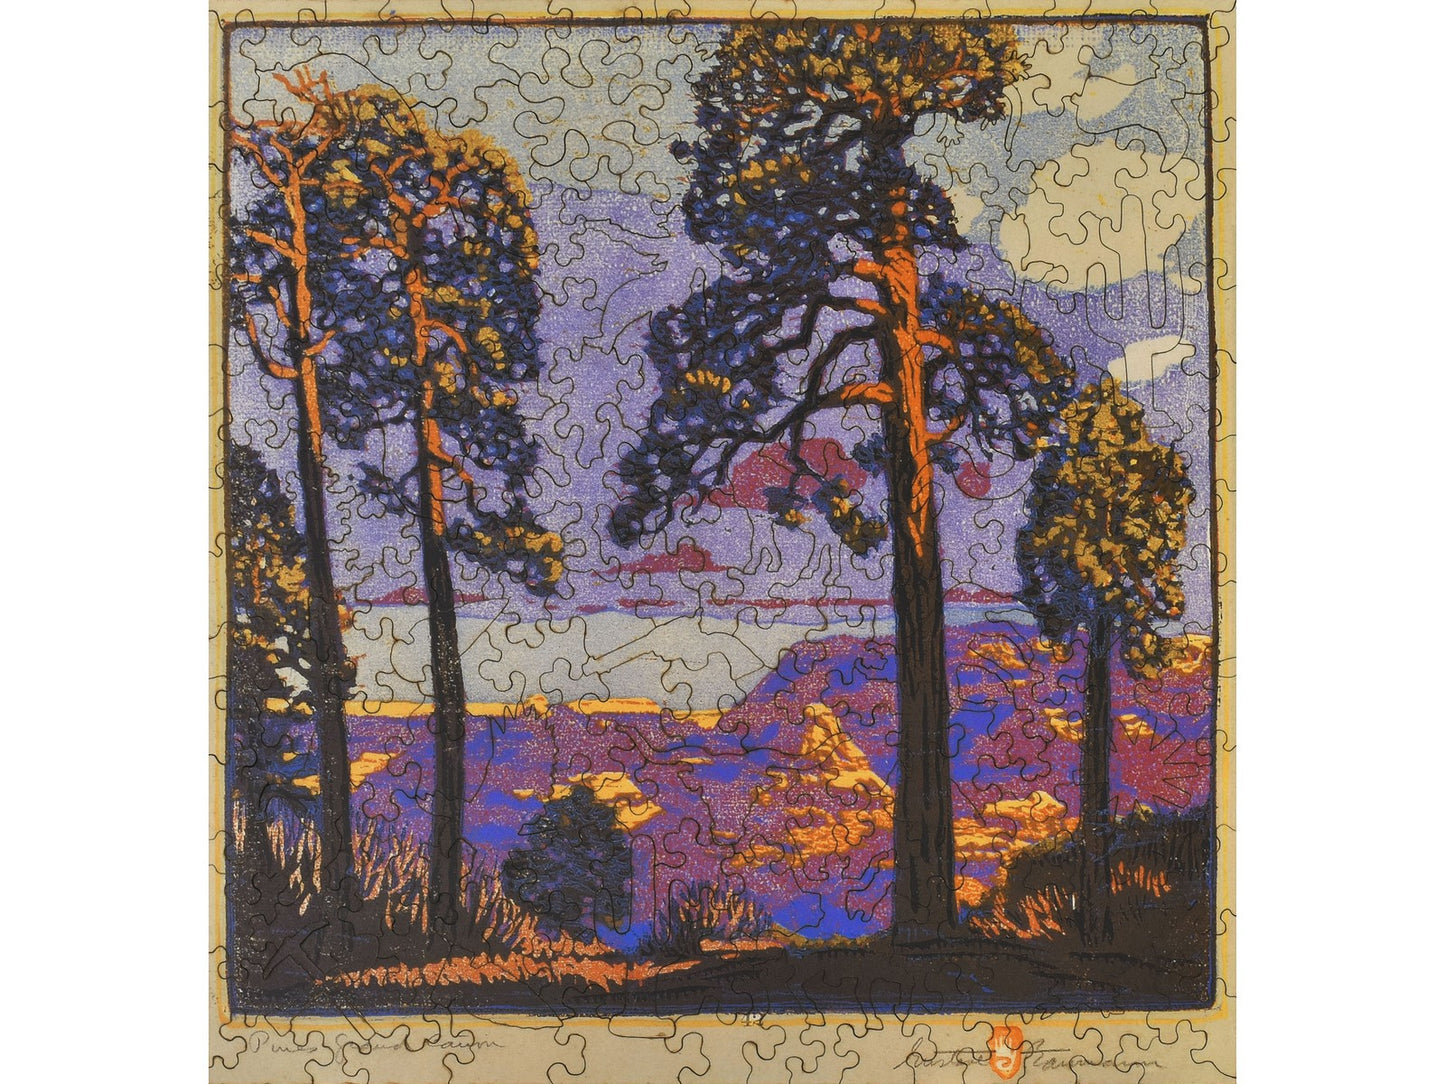 The front of the puzzle, Pines - Grand Canyon, which shows some pine trees at the rim of the grand canyon.